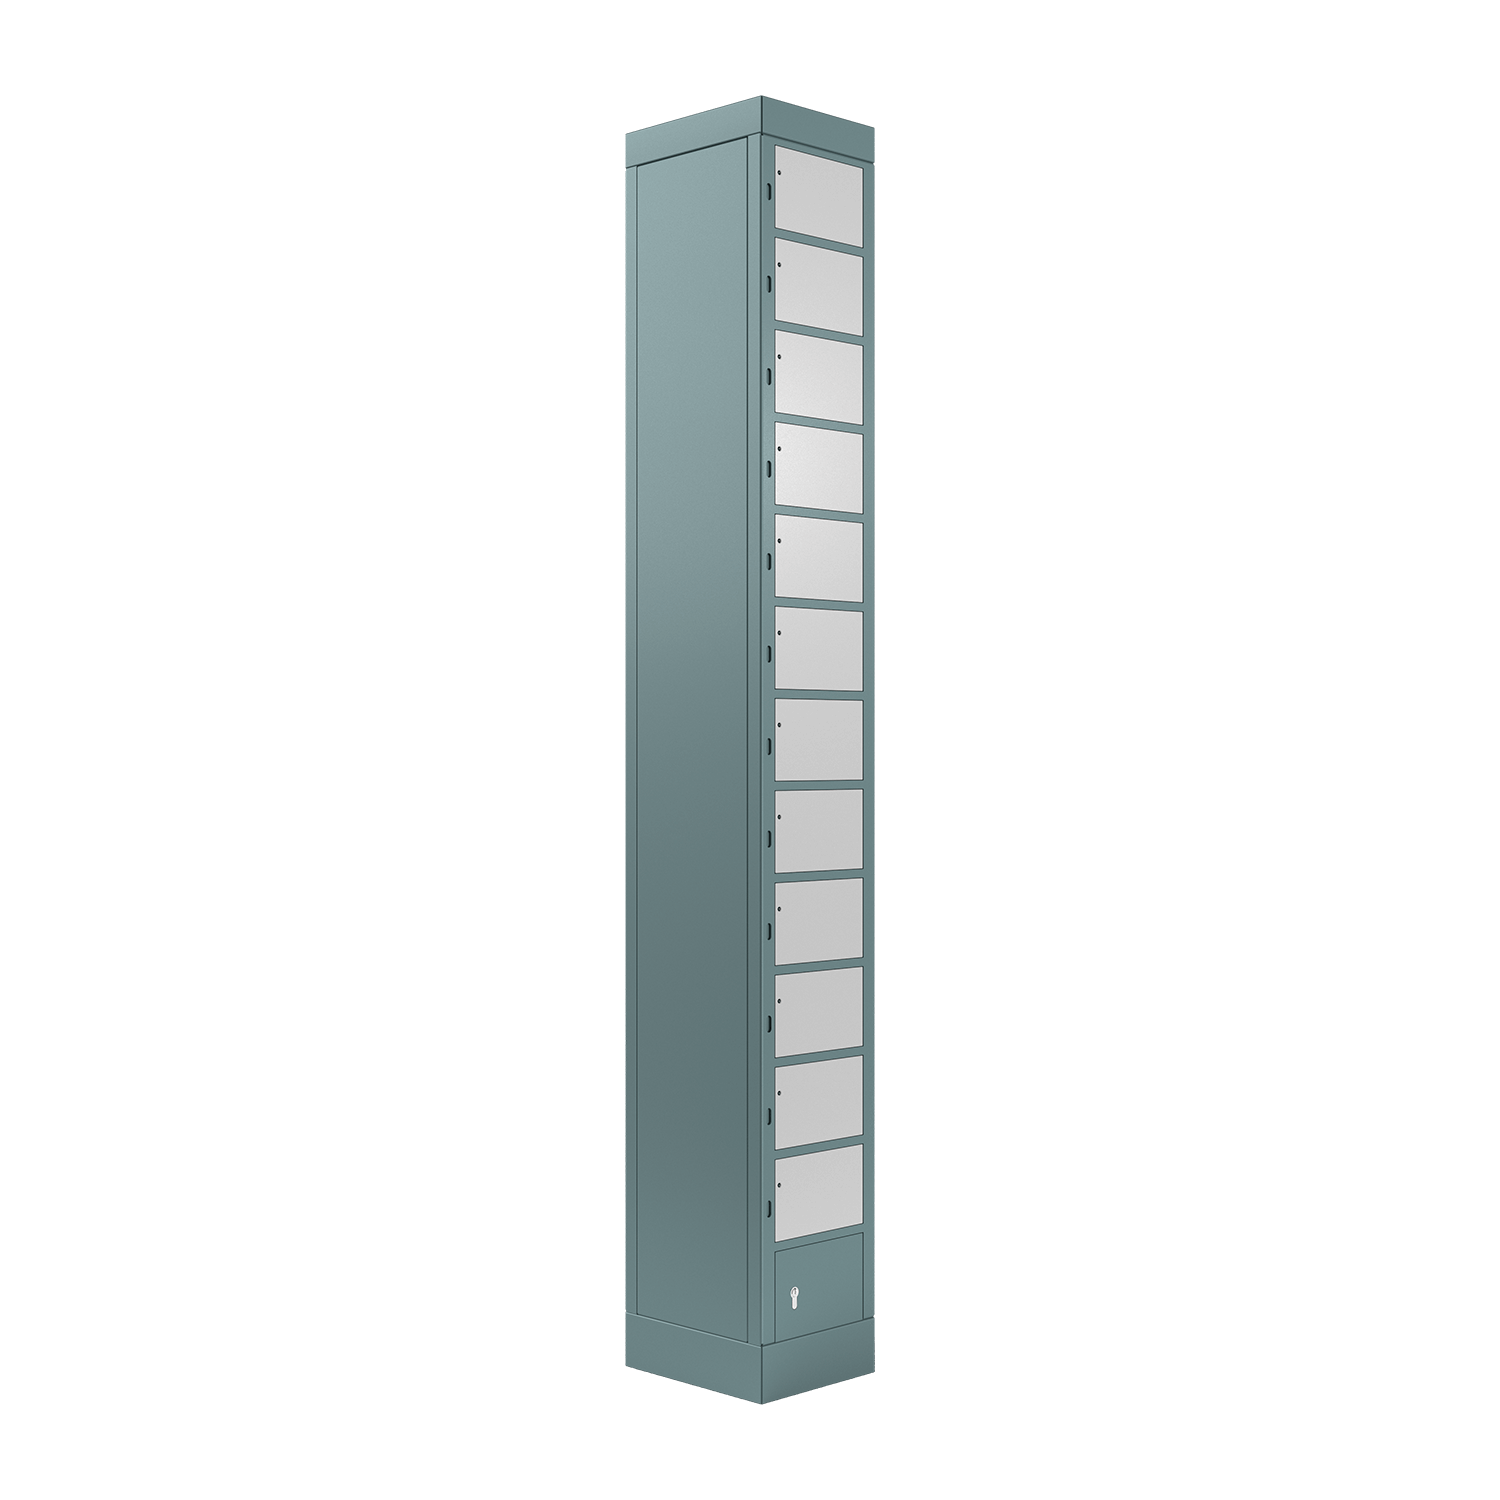 locker compartment system, size S, with 12 compartments, left view